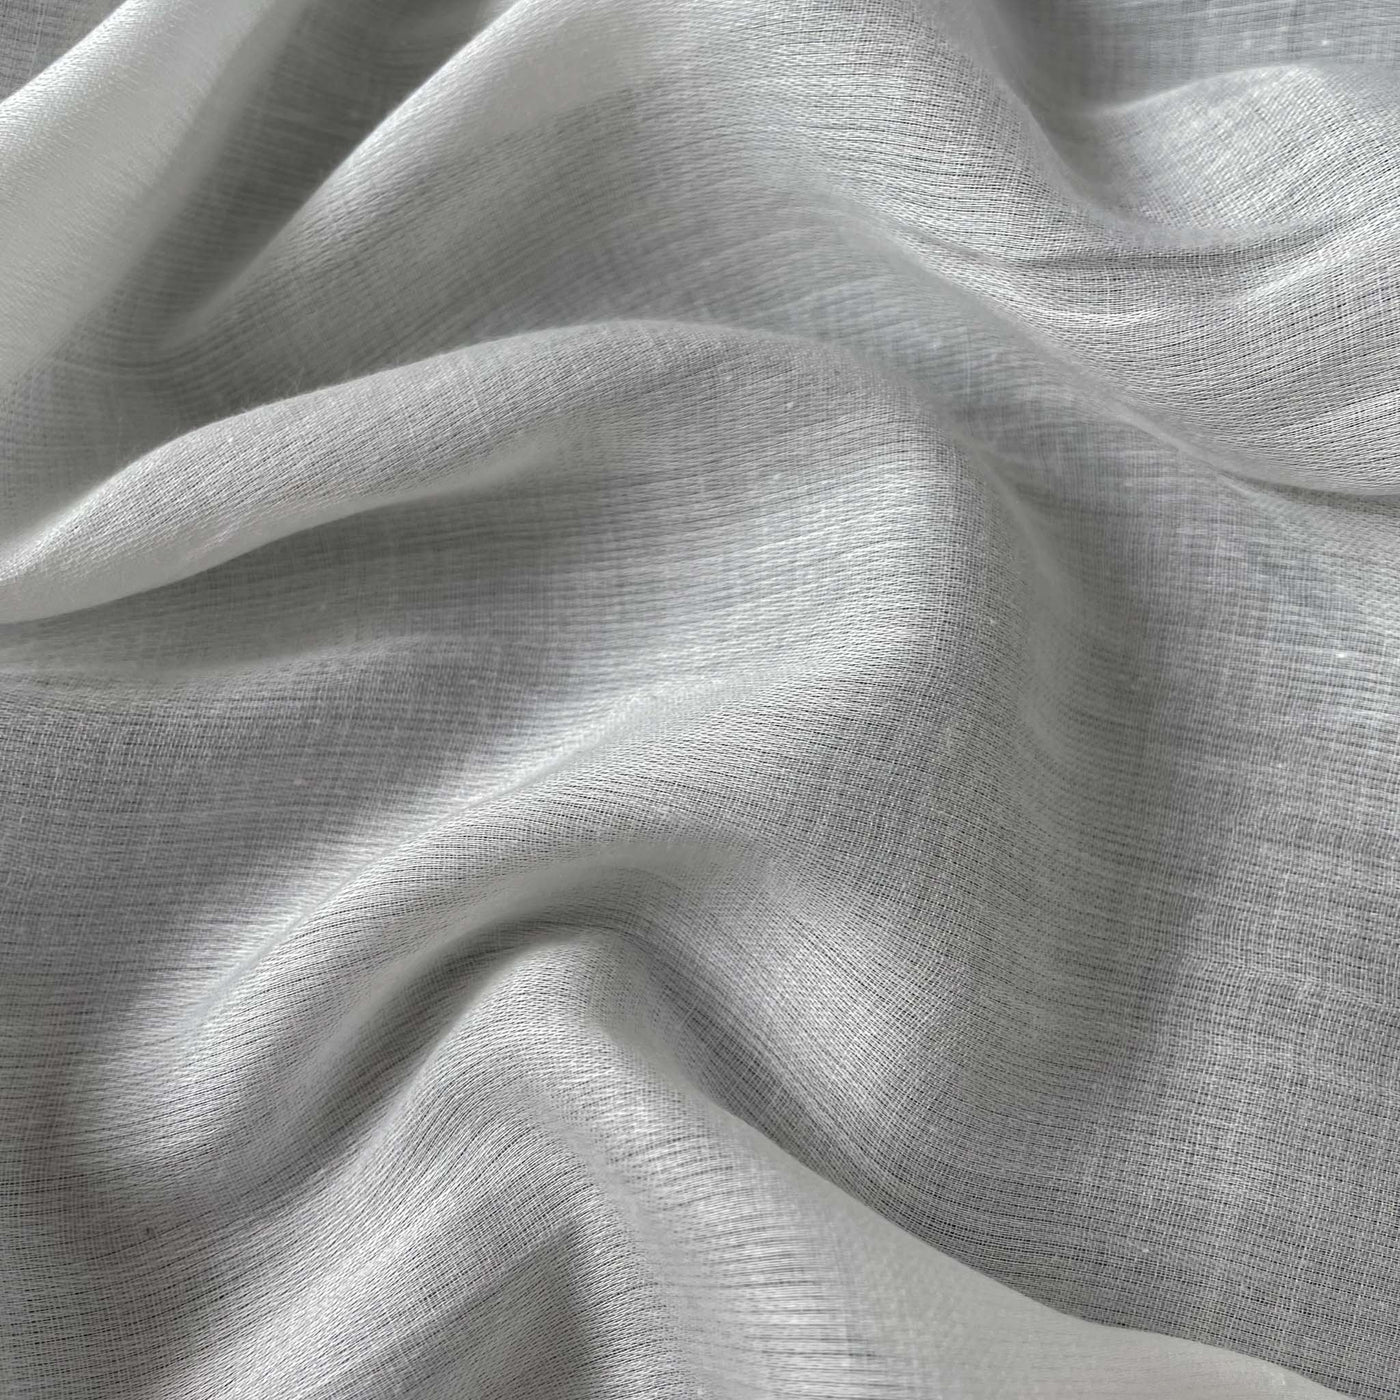 Dyeable Fabric Cut Piece (CUT PIECE) White Dyeable Pure Lawn Cotton Satin Plain Fabric (Width 44 Inches)